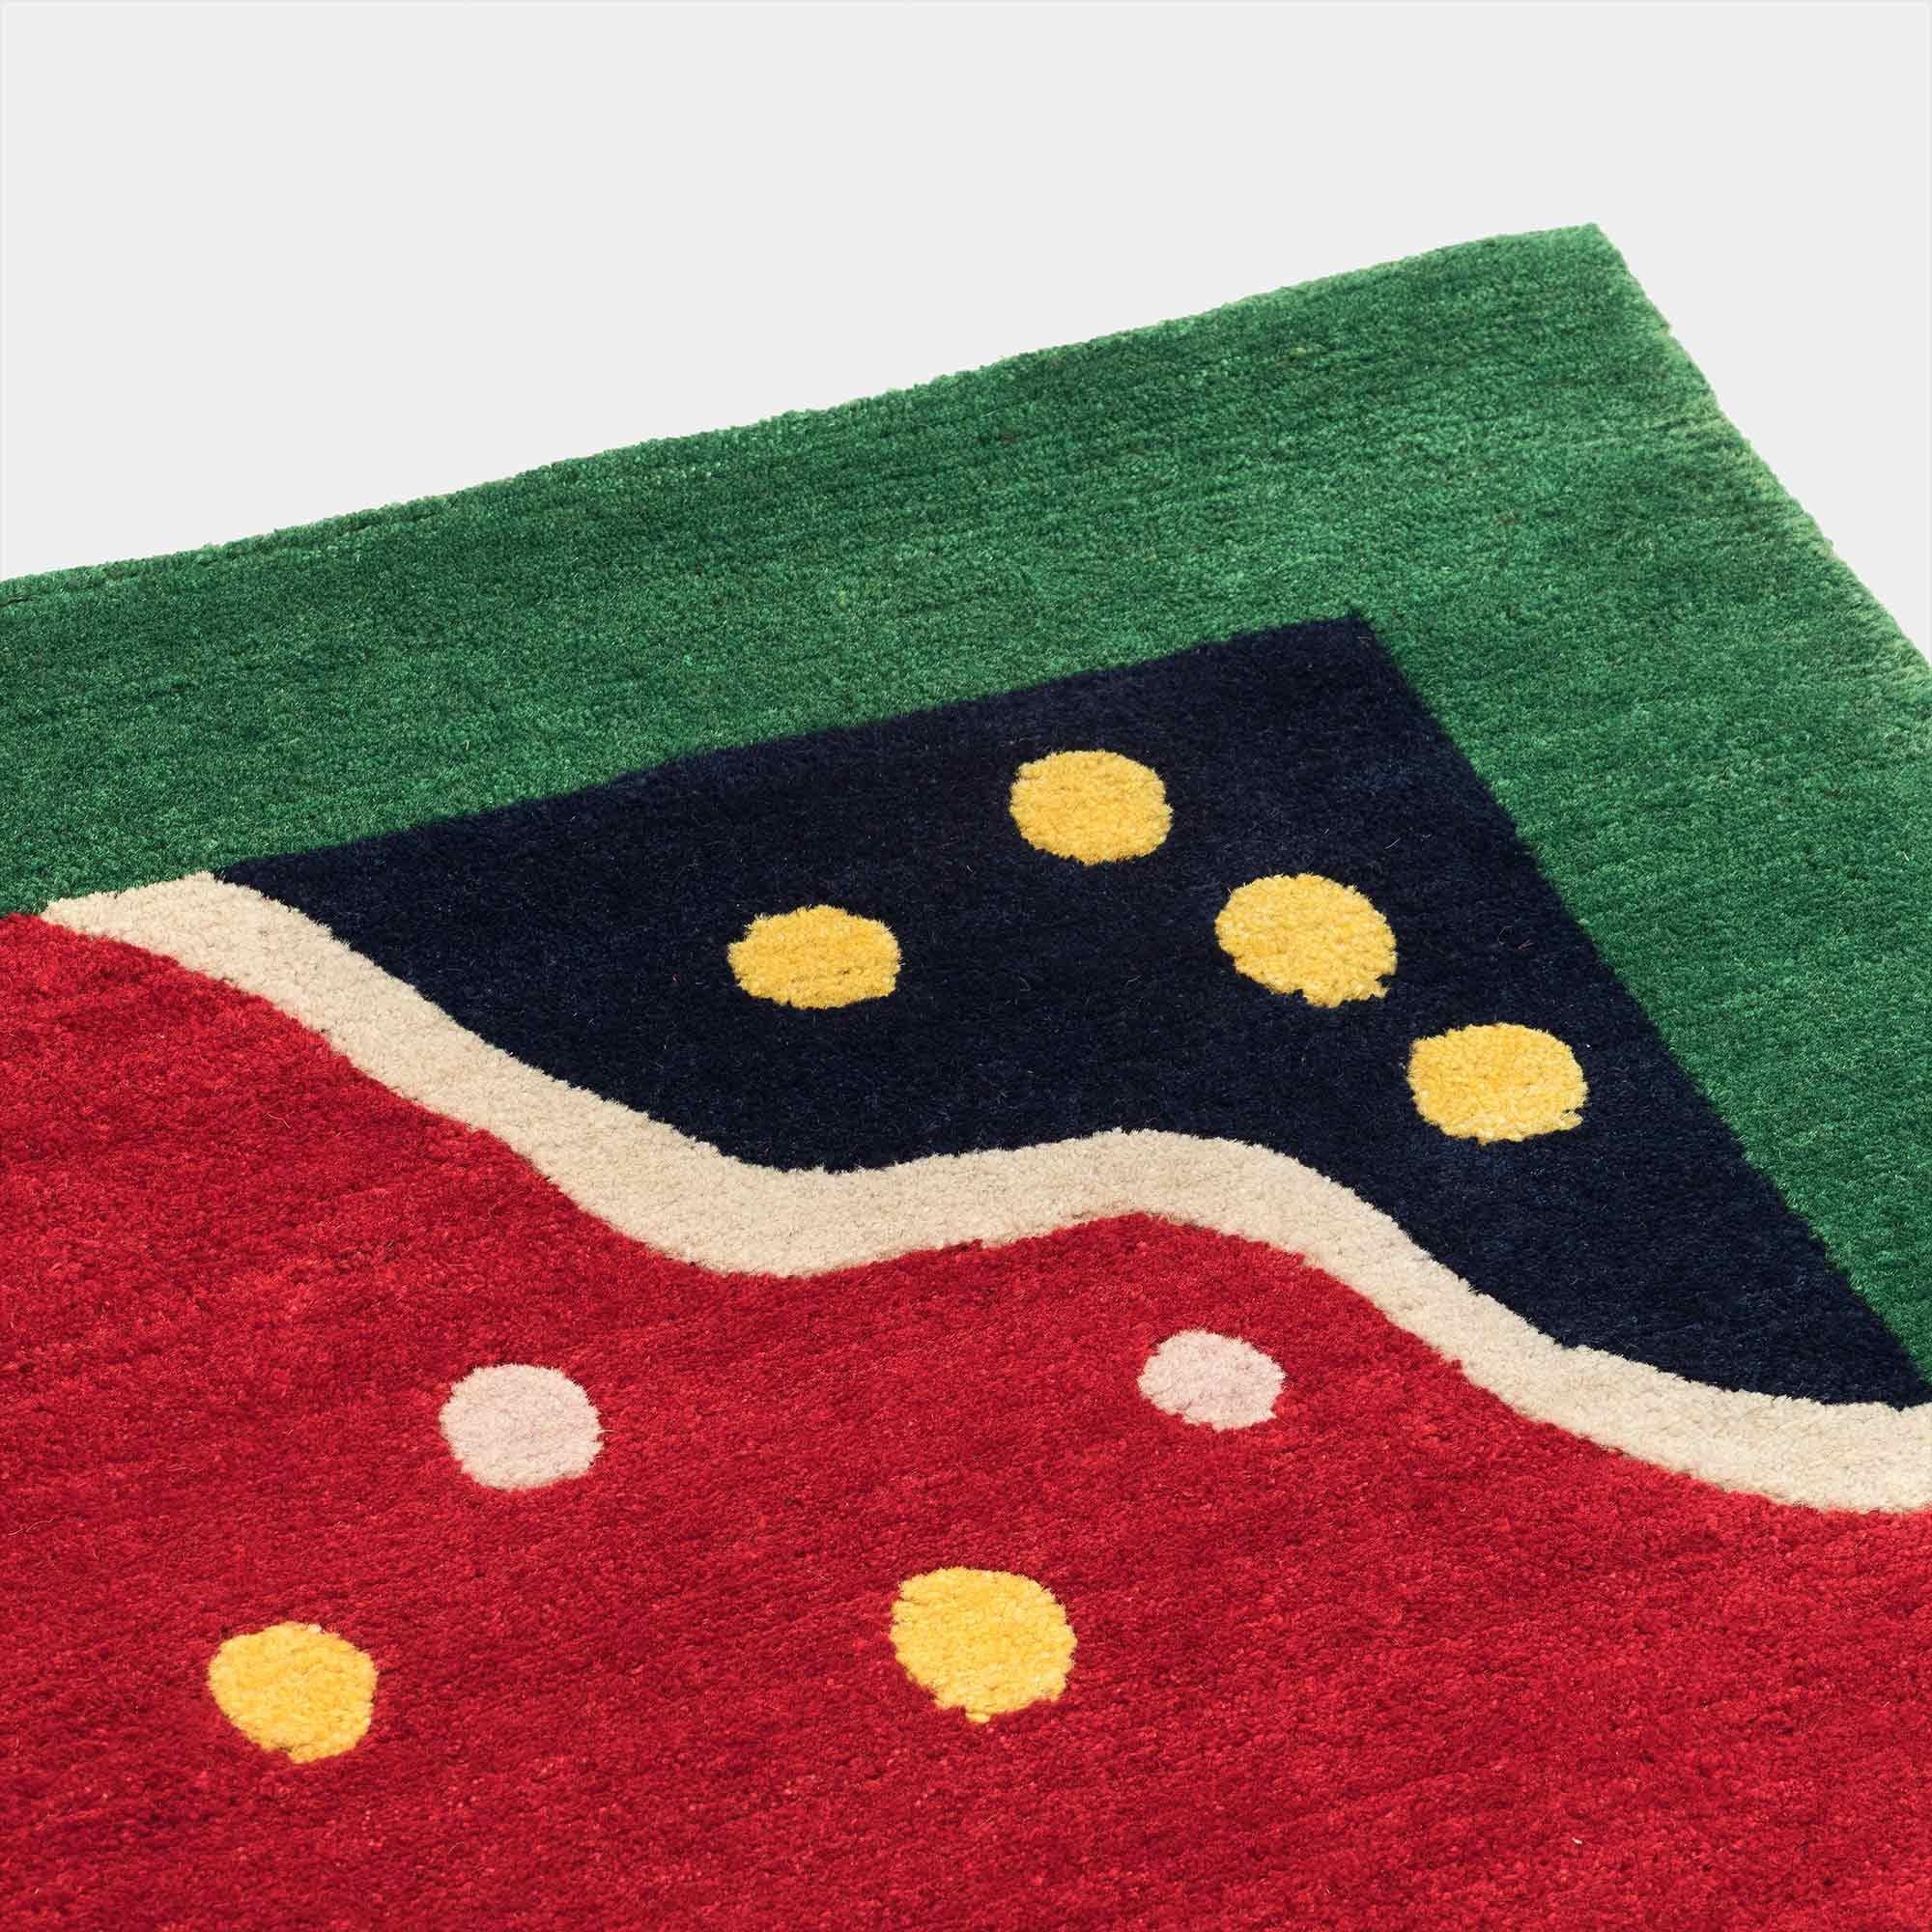 INDIA woollen carpet by George J. Sowden for Post Design collection/Memphis

A woollen carpet handcrafted by different Nepalese artisans. Made in a limited edition of 36 signed, numbered examples.

As the carpet is made by hand, there are slight